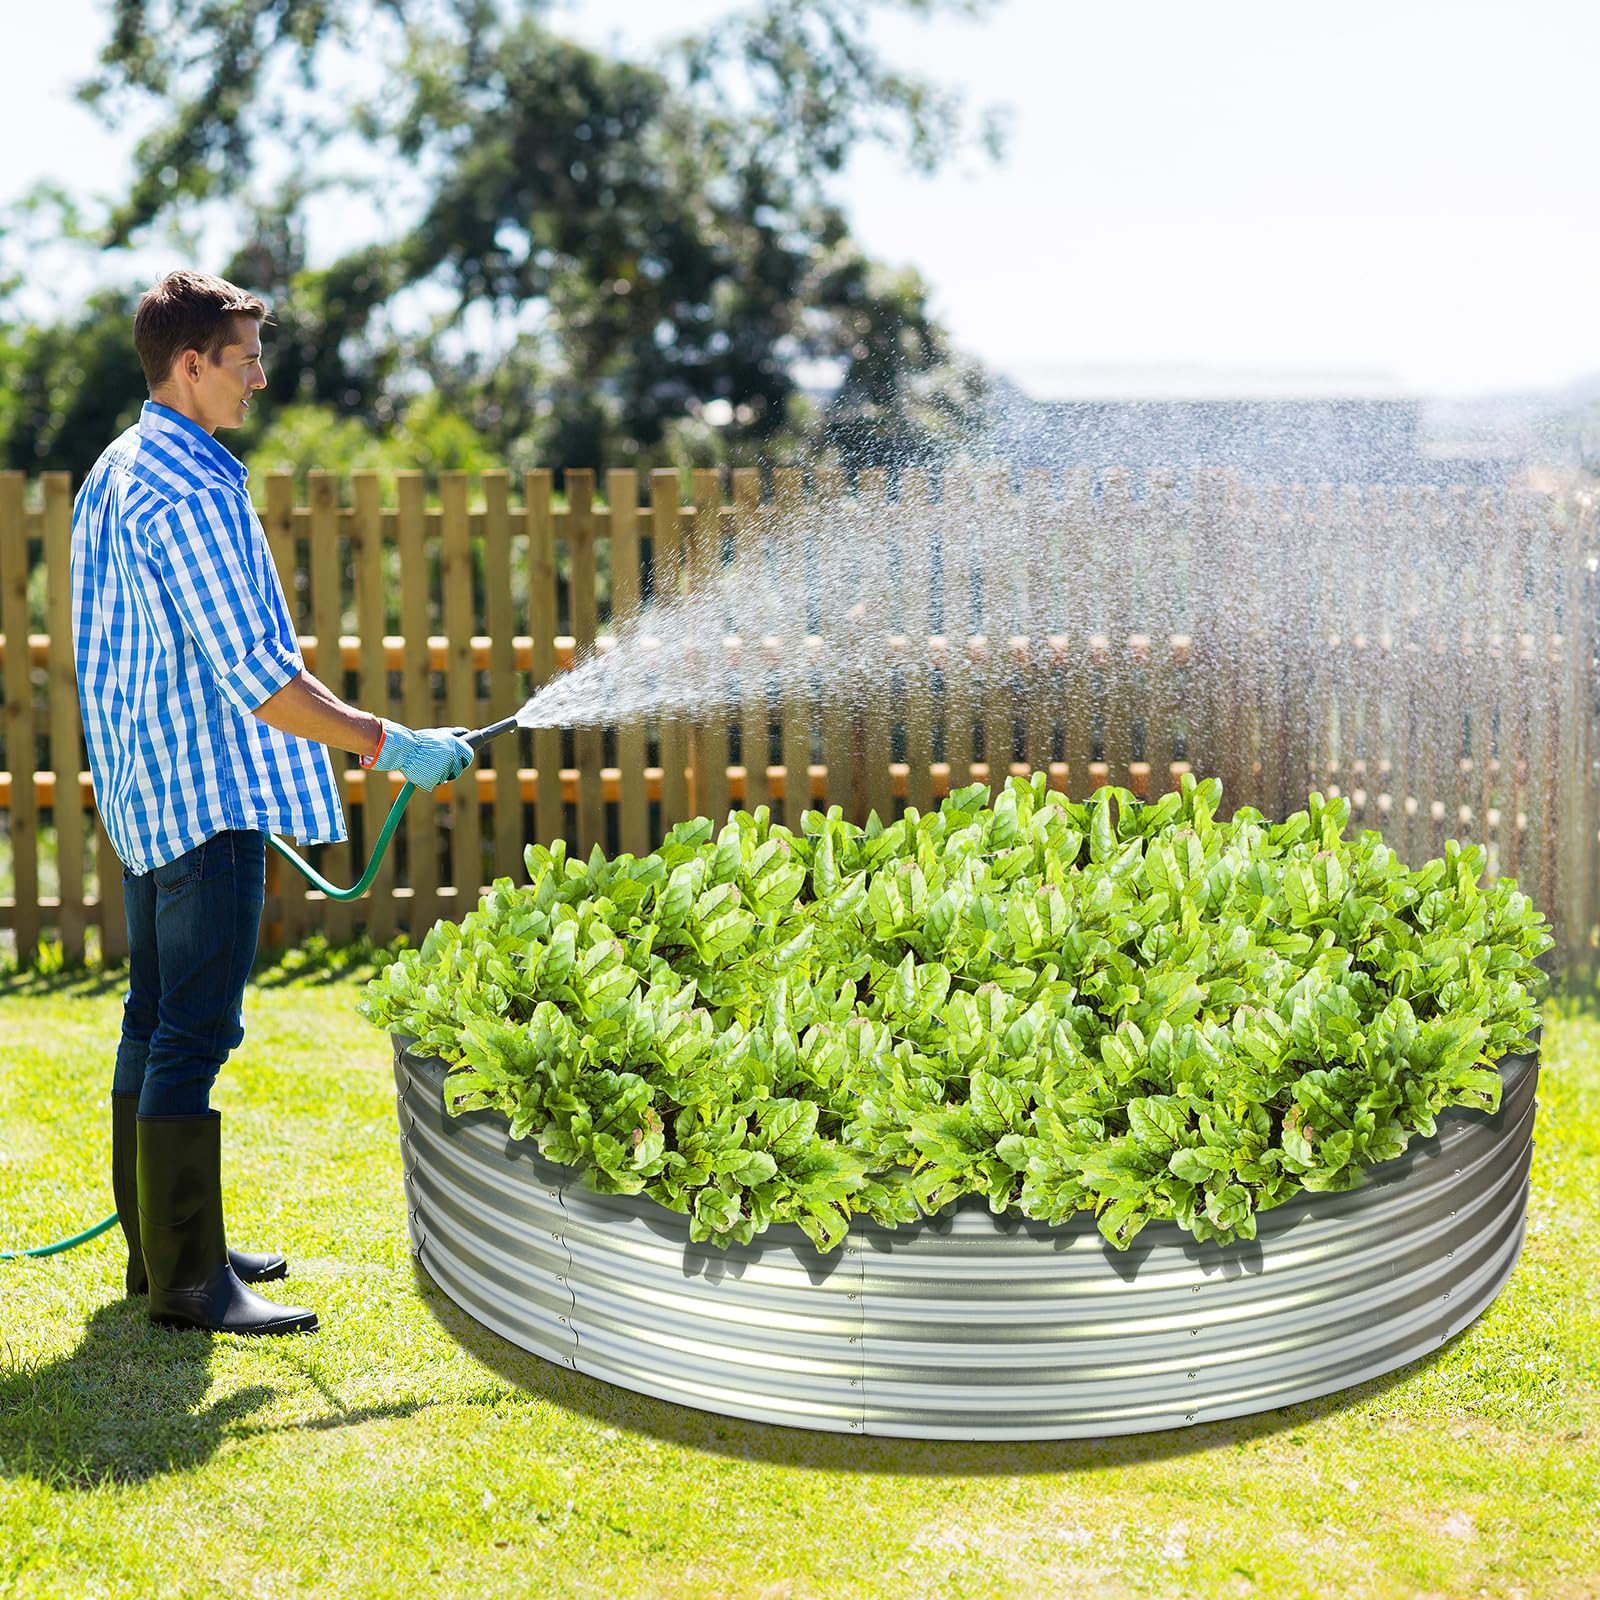 OUSHENG Round Galvanized Raised Garden Beds Outdoor, Steel Fire Pit Ring Flower Planter Metal Above Ground Boxes Kit for Gardening Vegetables Outside, 2×2×1ft